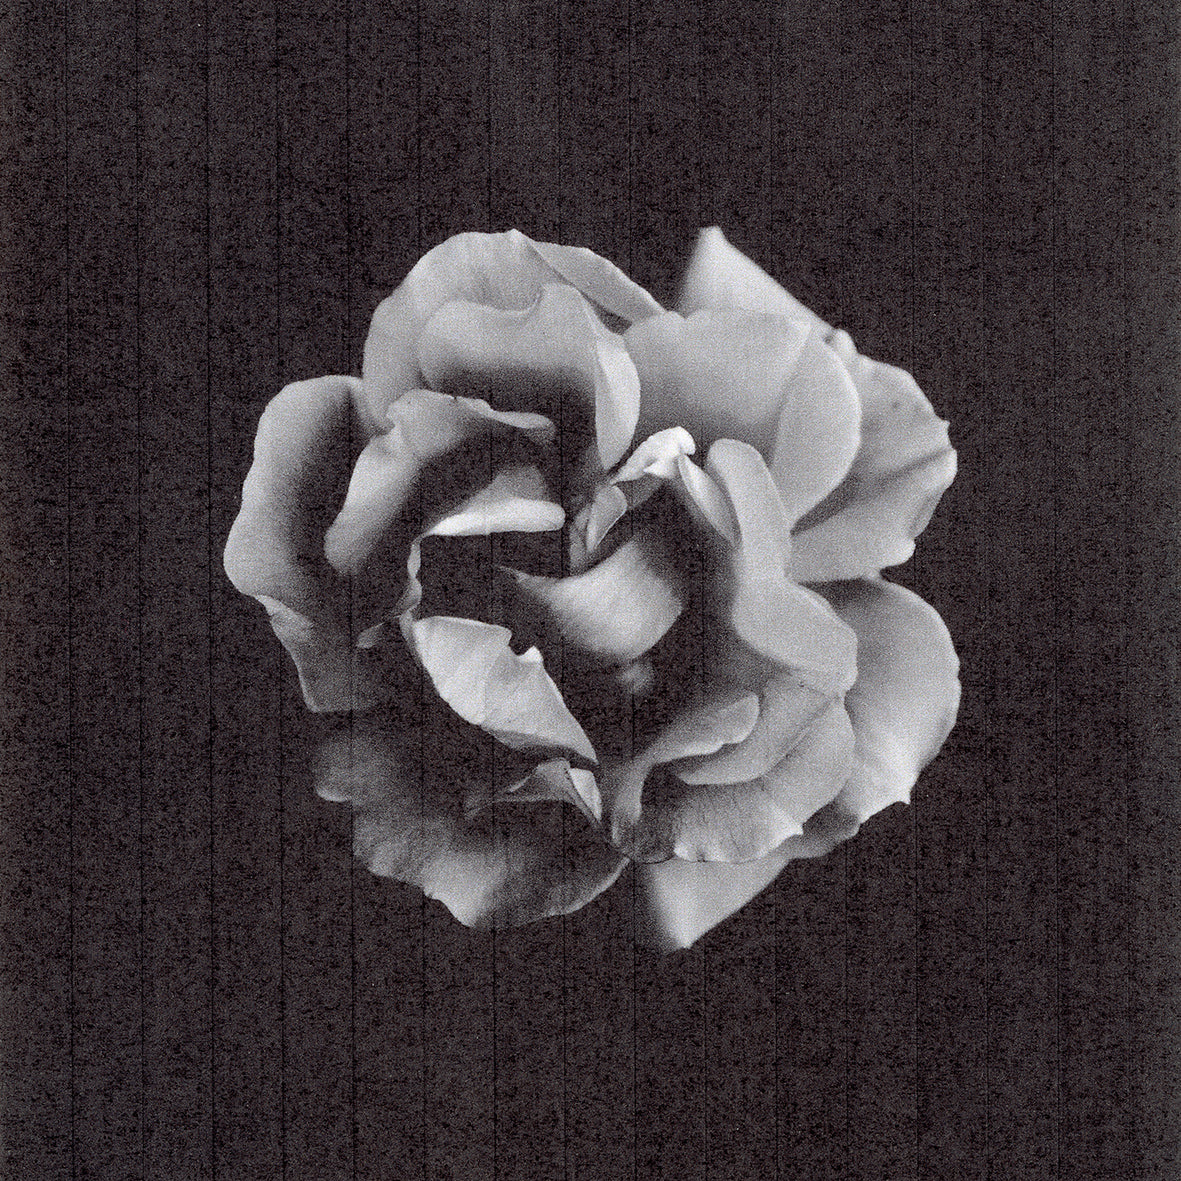 Forever Rose, Victor Nicolai